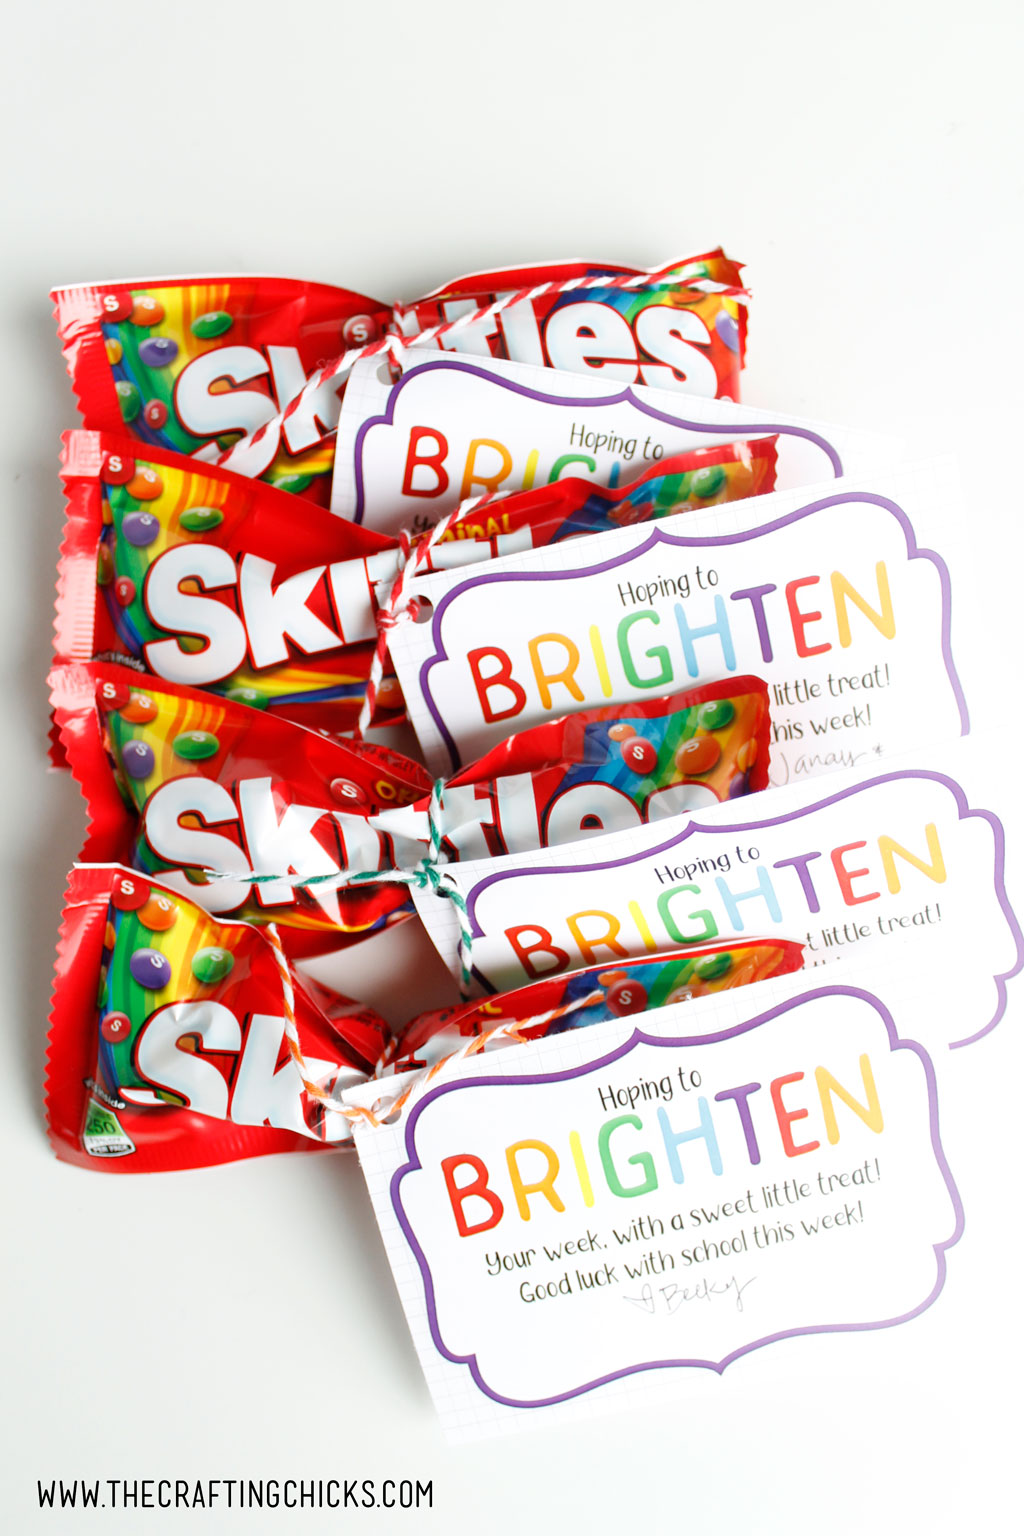 Brighten your day gift tags tied to bags of Skittles as a gift idea.